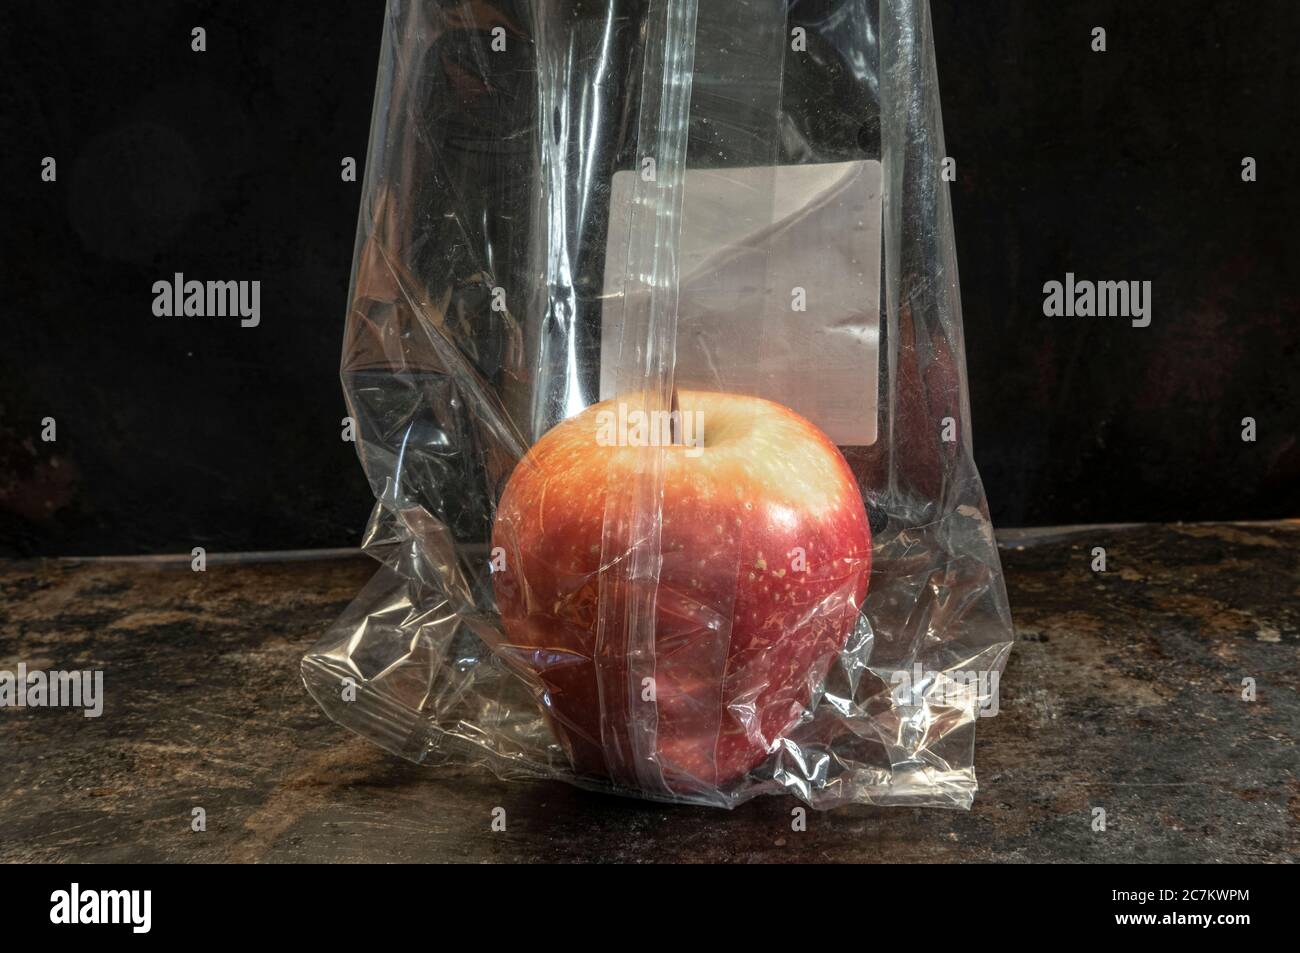 apple packed in non-biodegradable plastics Stock Photo